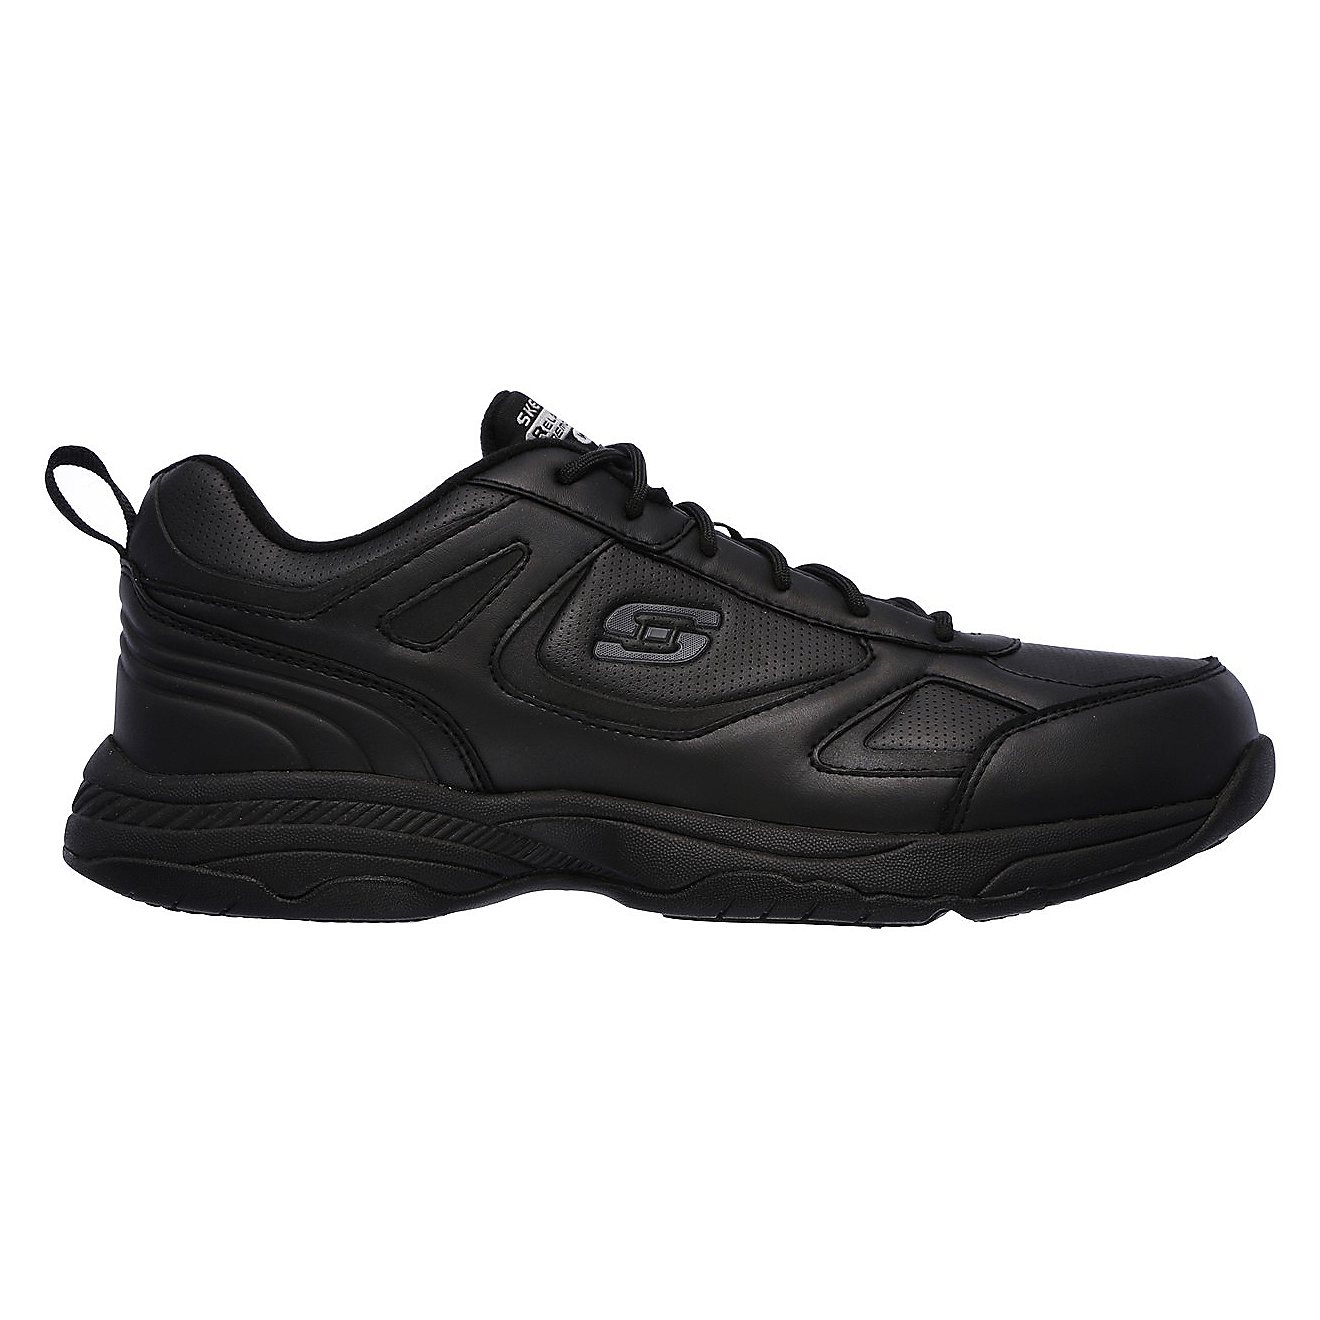 SKECHERS Men's Work Relaxed Fit Dighton EH Service Shoes                                                                         - view number 1